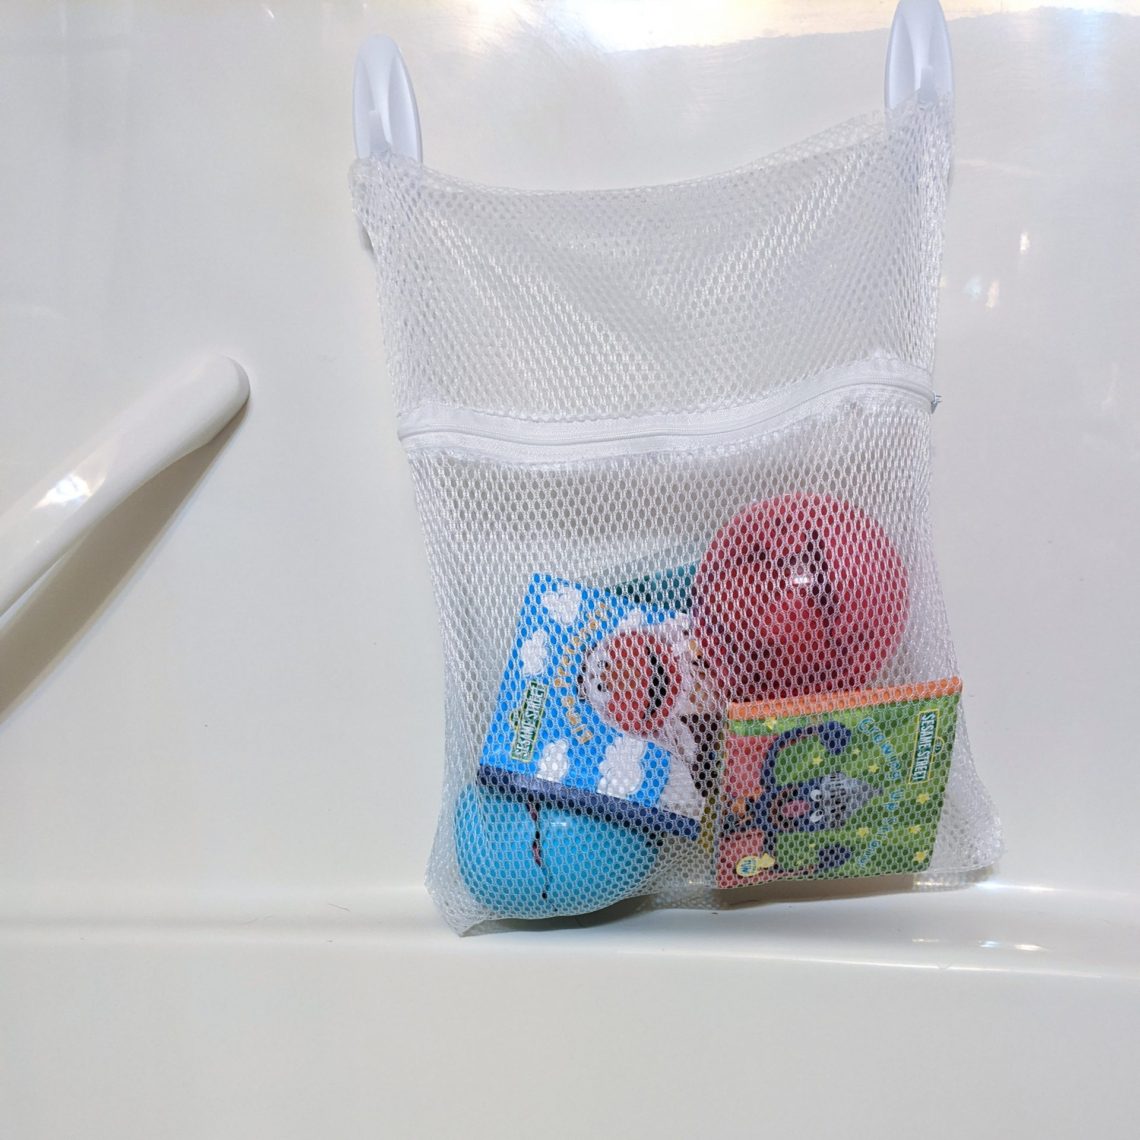 How to simplify and organize the kids' bathroom. Organize the bath toys using laundry bags from the Dollar Tree! #kidsbathroomhacks #kidsbathroom #kidsbathroomideas #organization